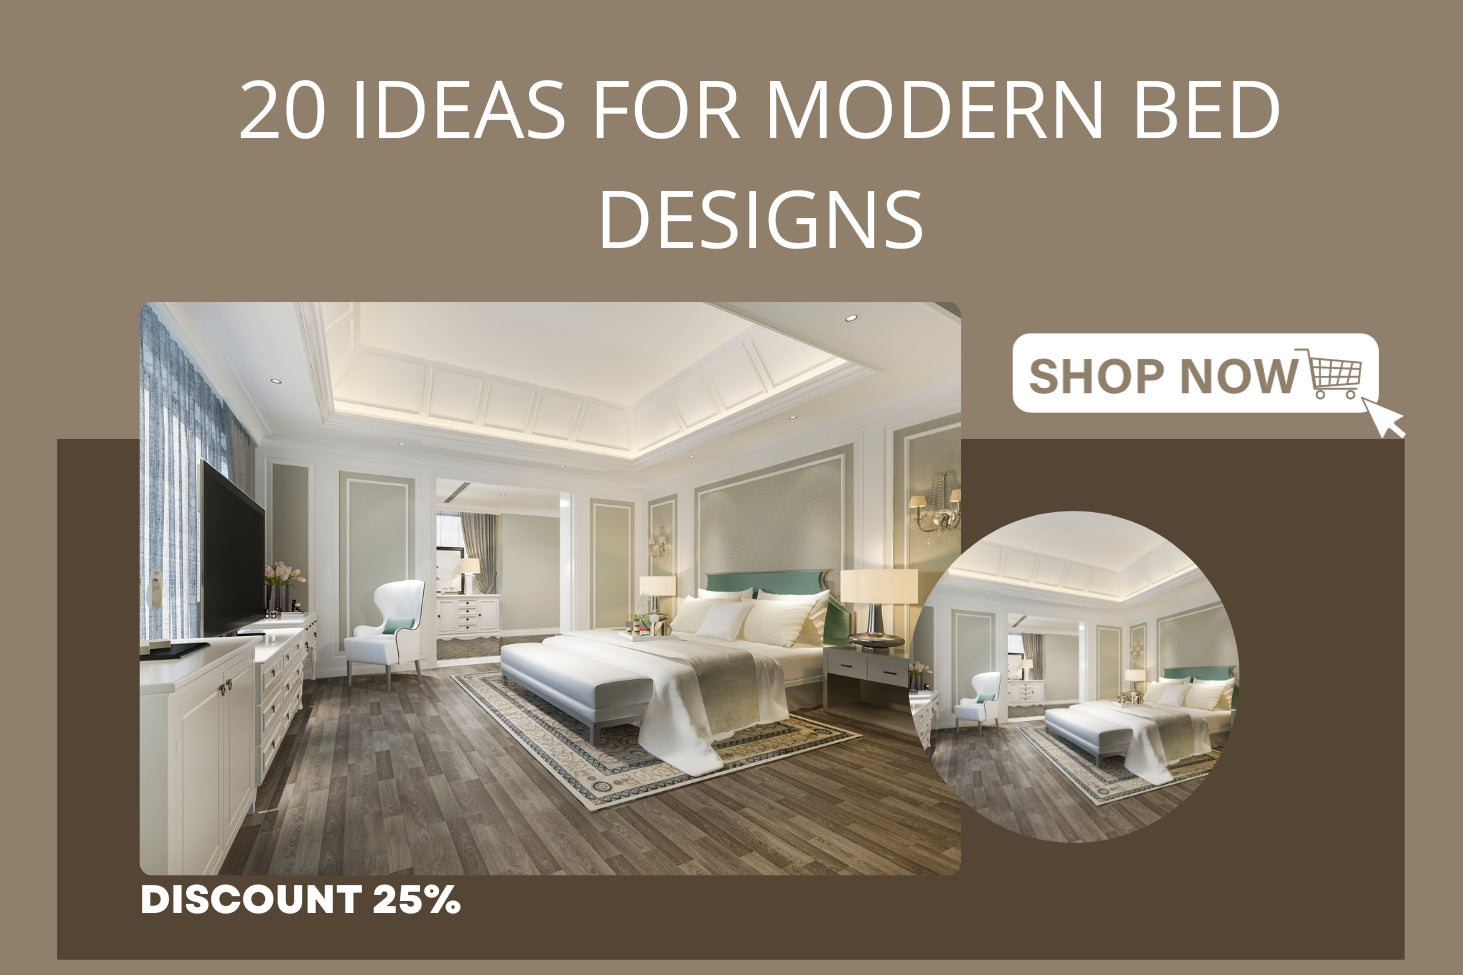 20 Ideas for Modern Bed Designs